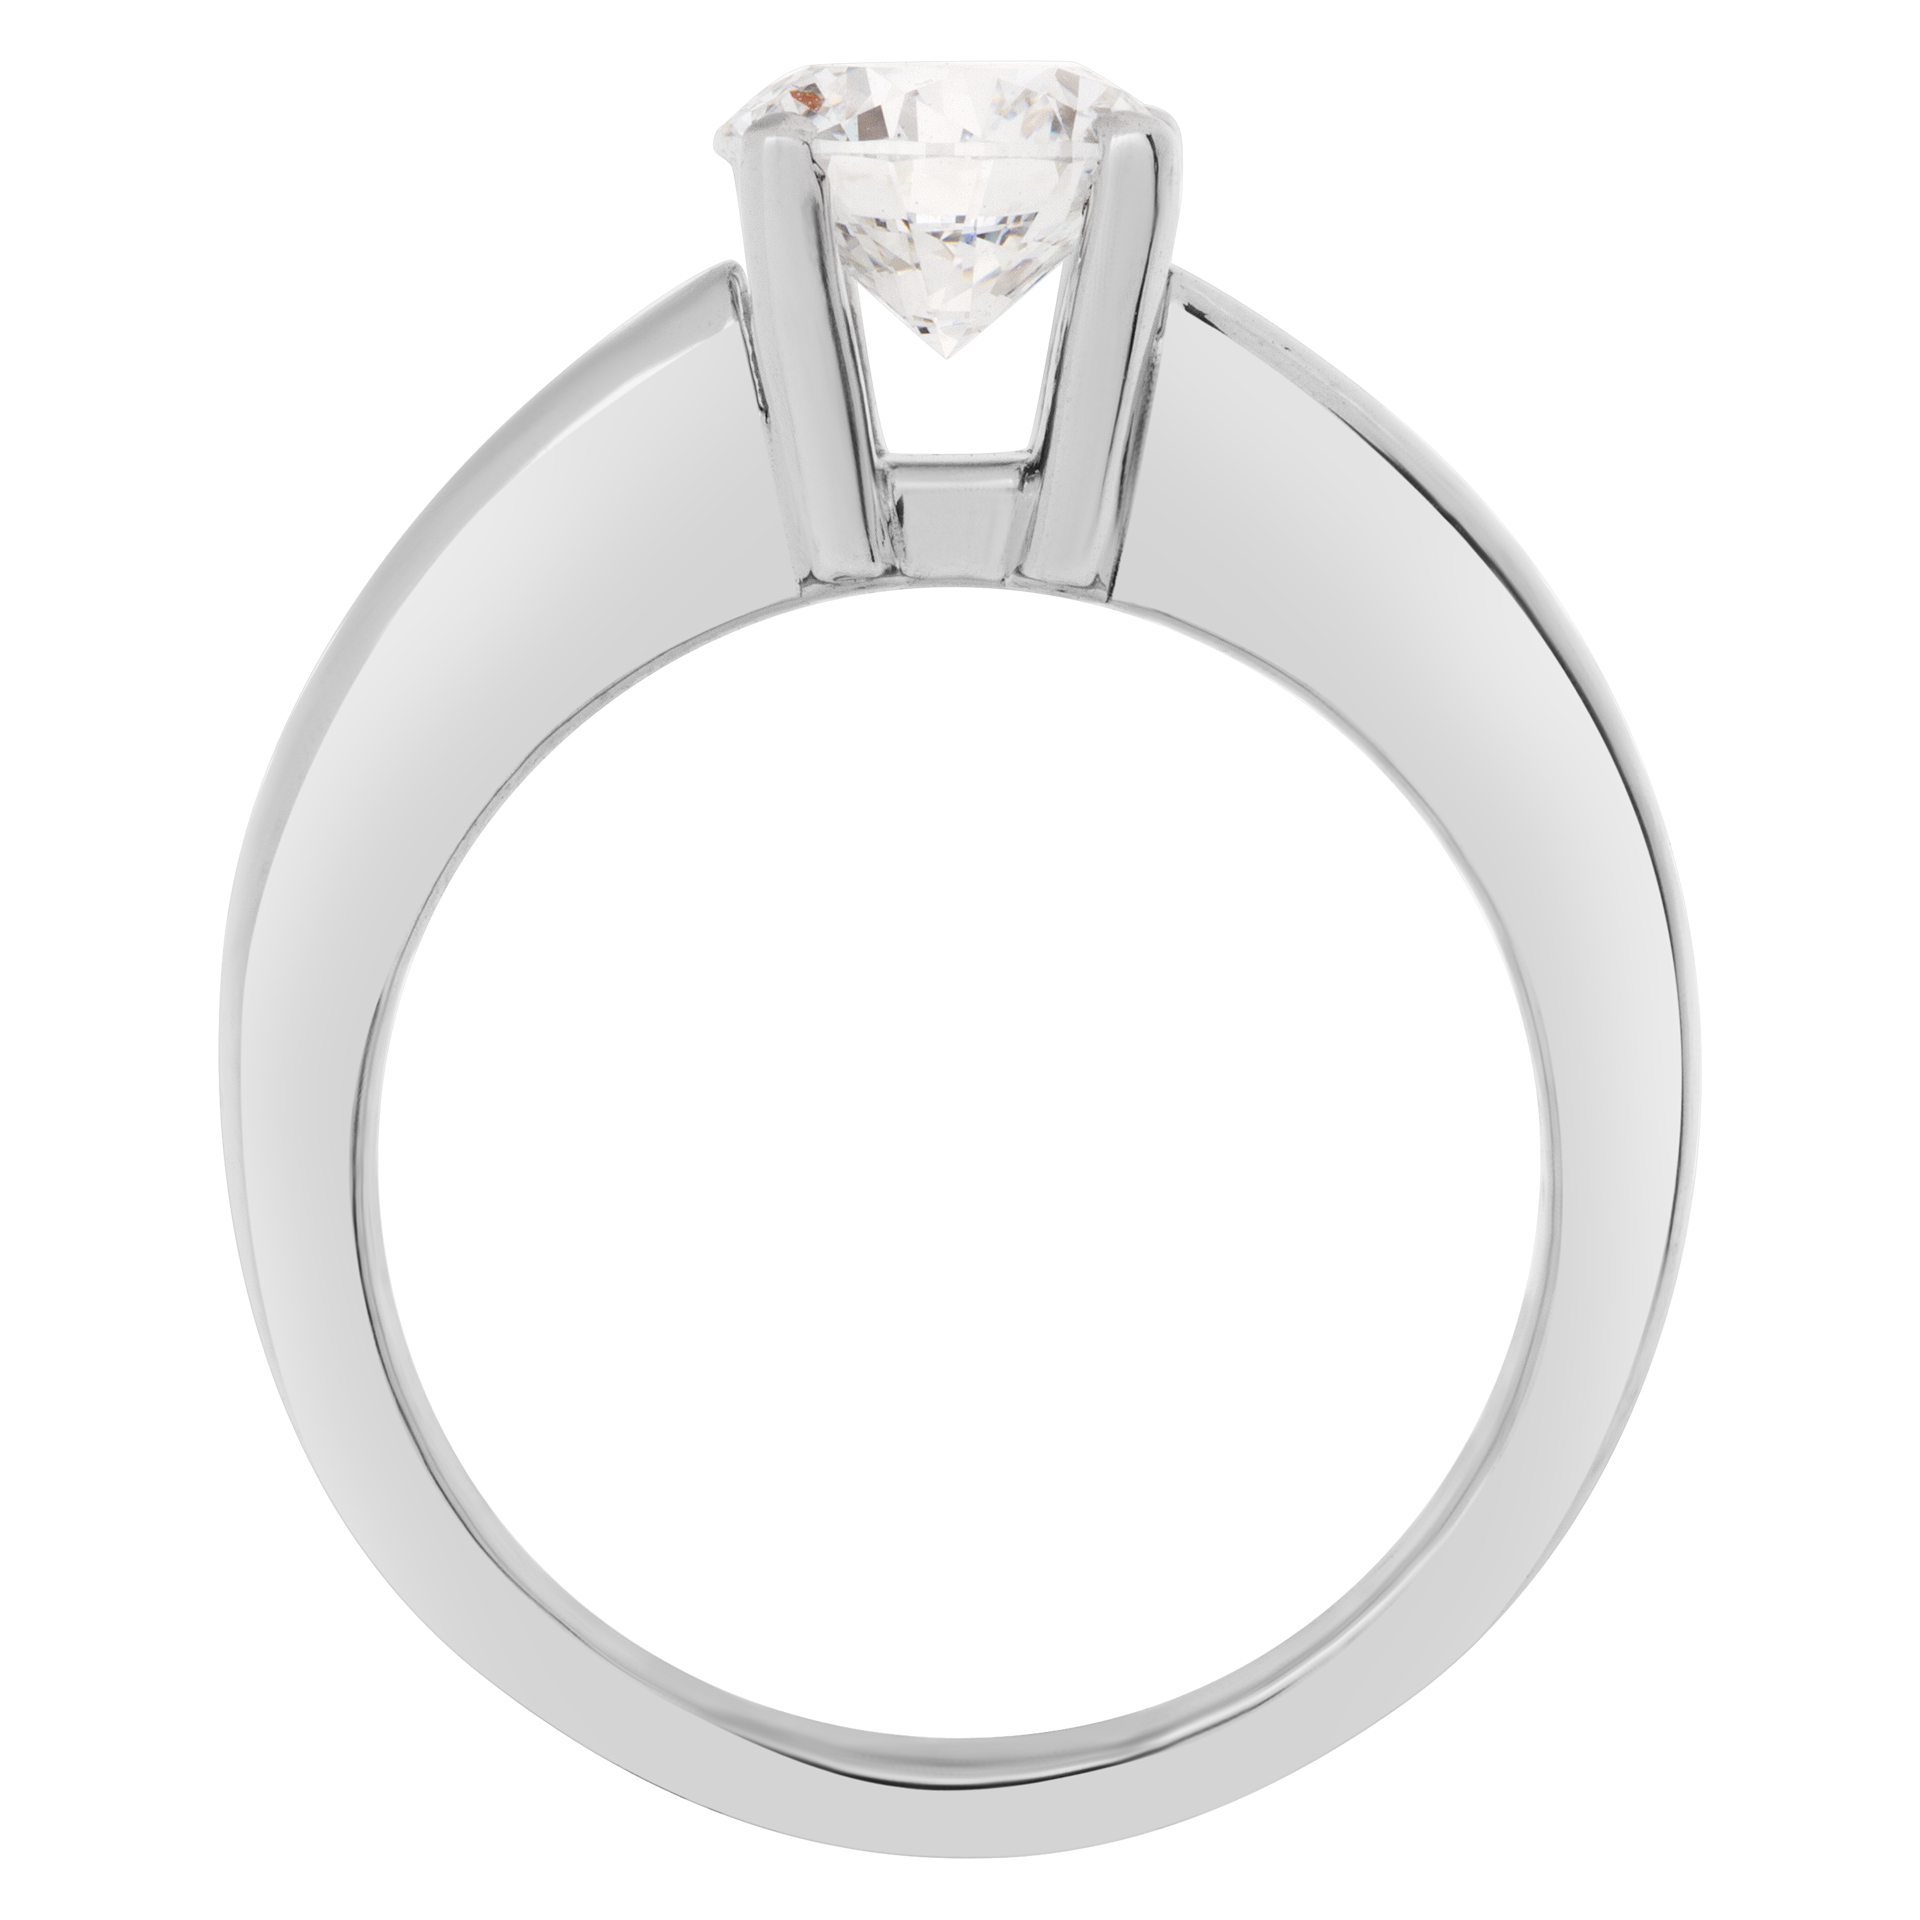 GIA Certified Diamond 1 ct (E color, VVS2 clarity) ring set in platinum. Size 5.25 image 4